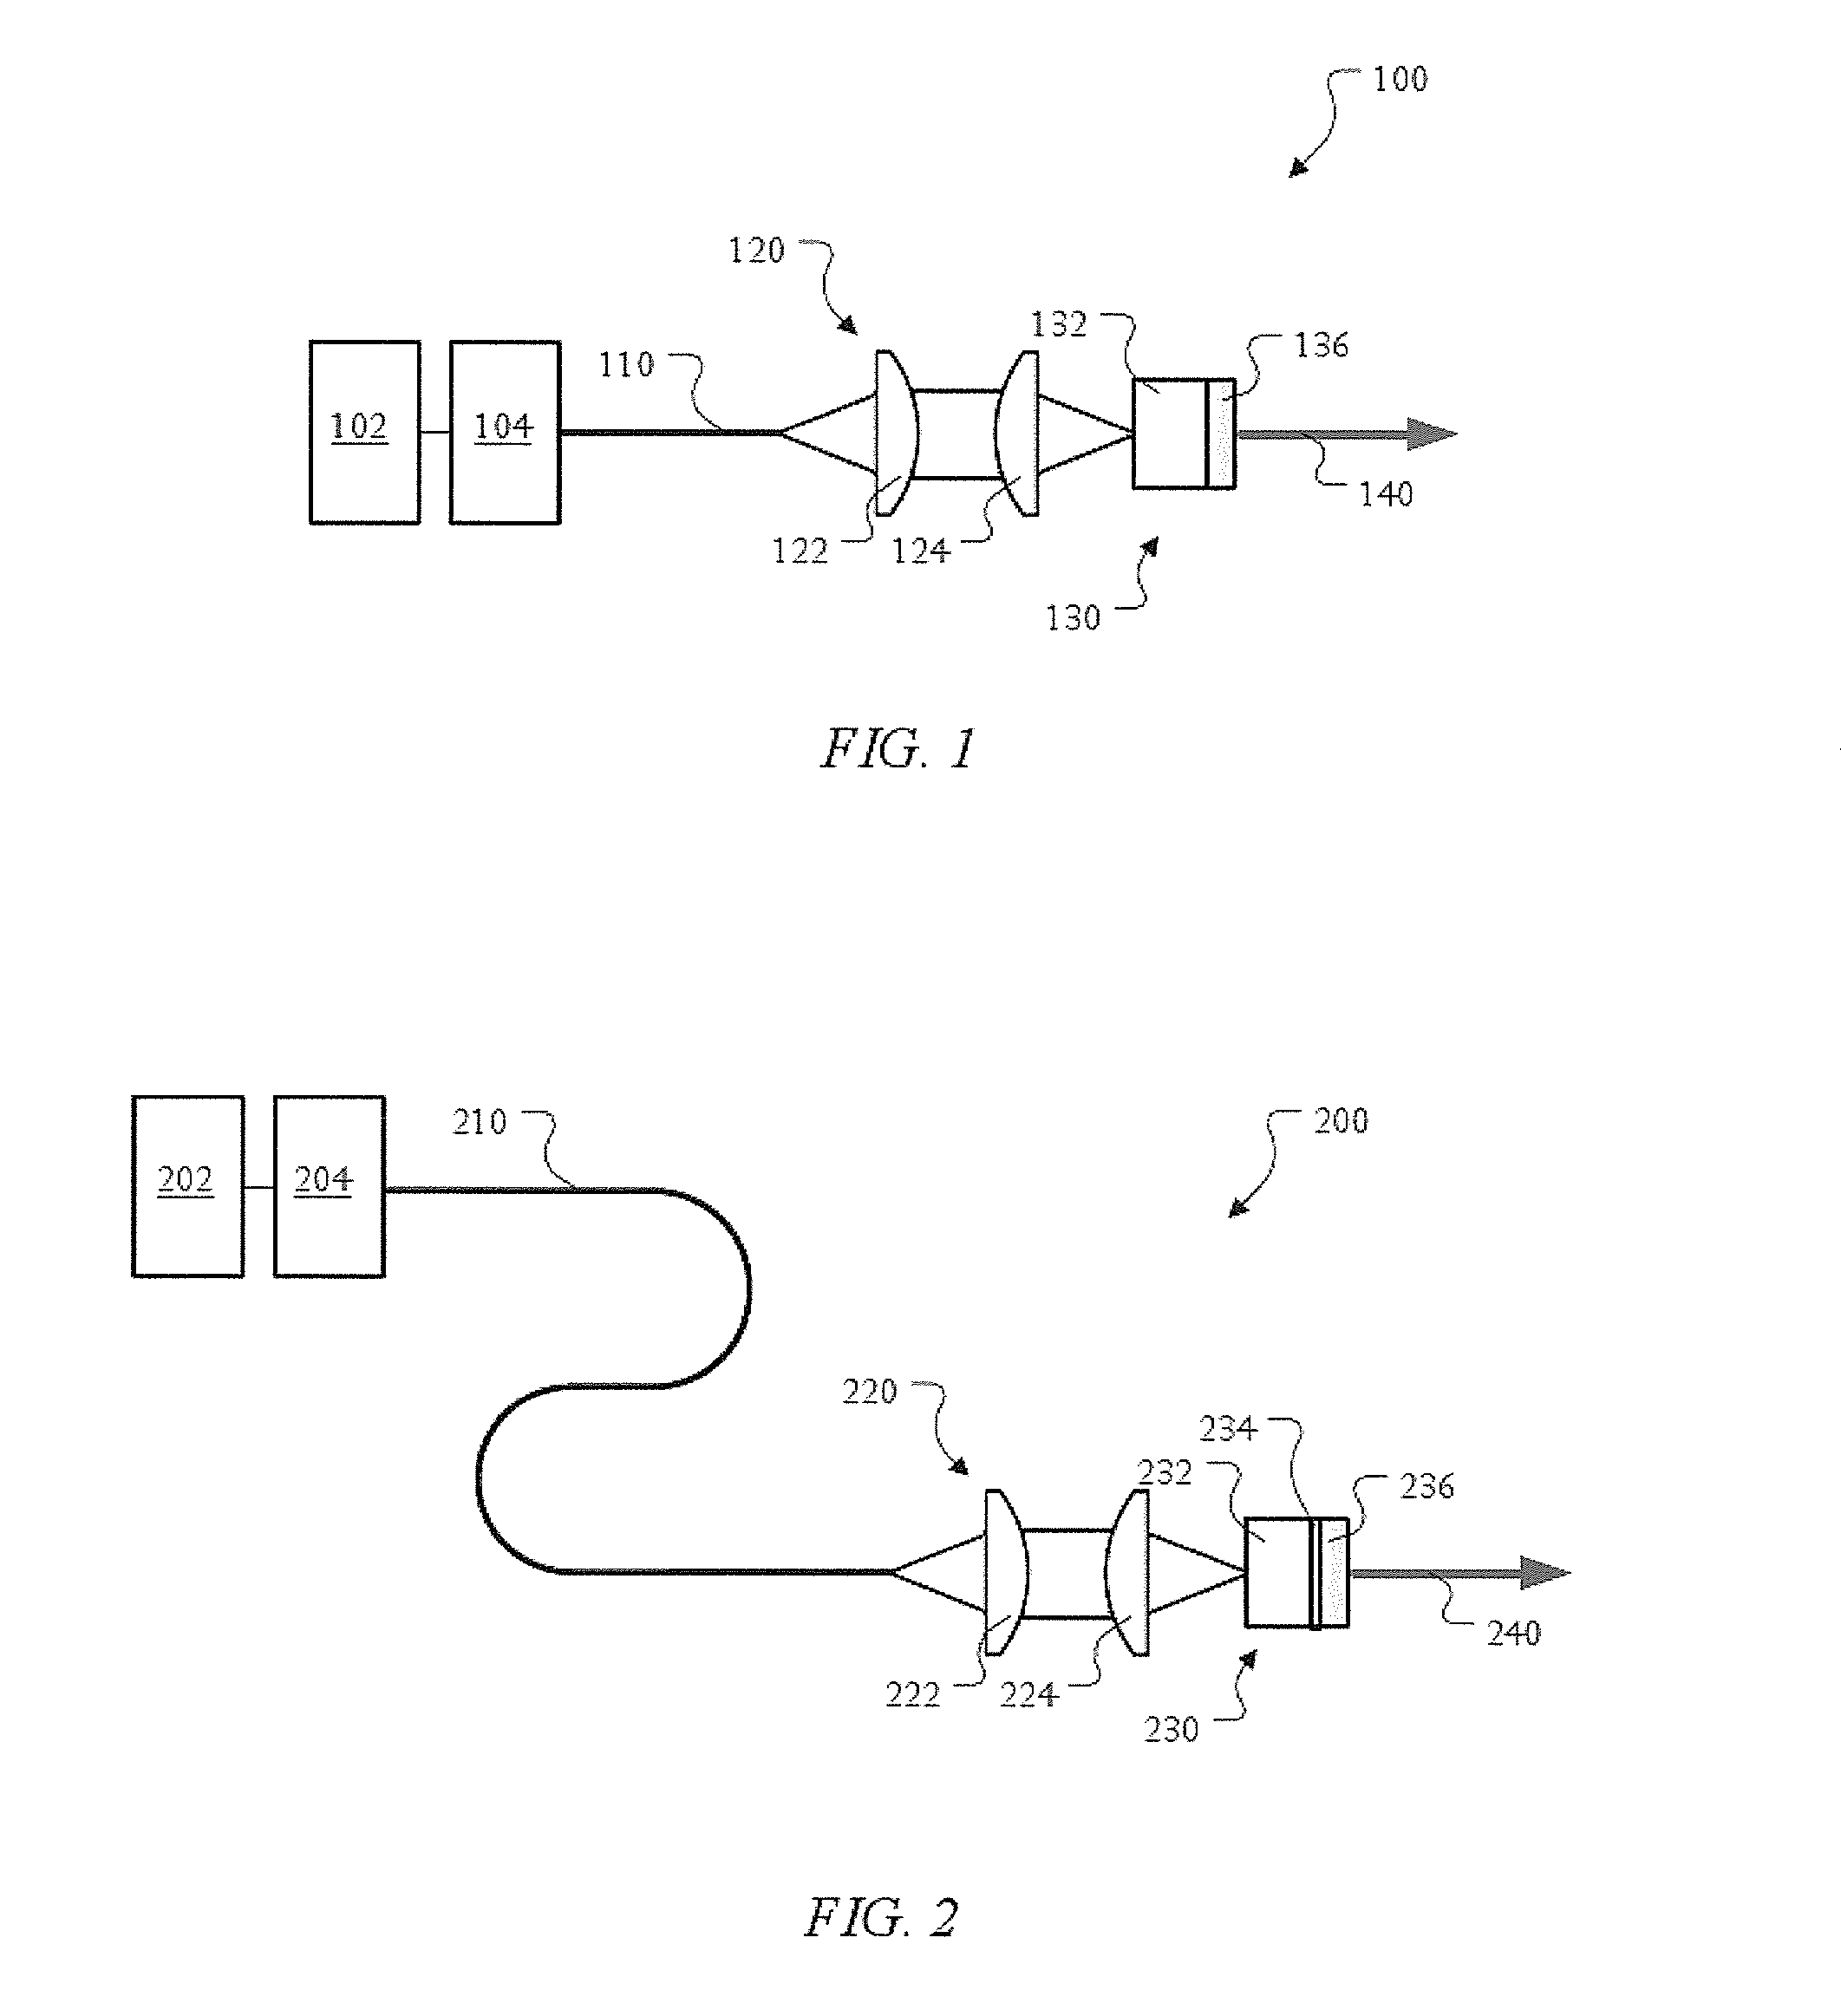 Laser system and method for producing a linearly polarized single frequency output using polarized and non-polarized pump diodes